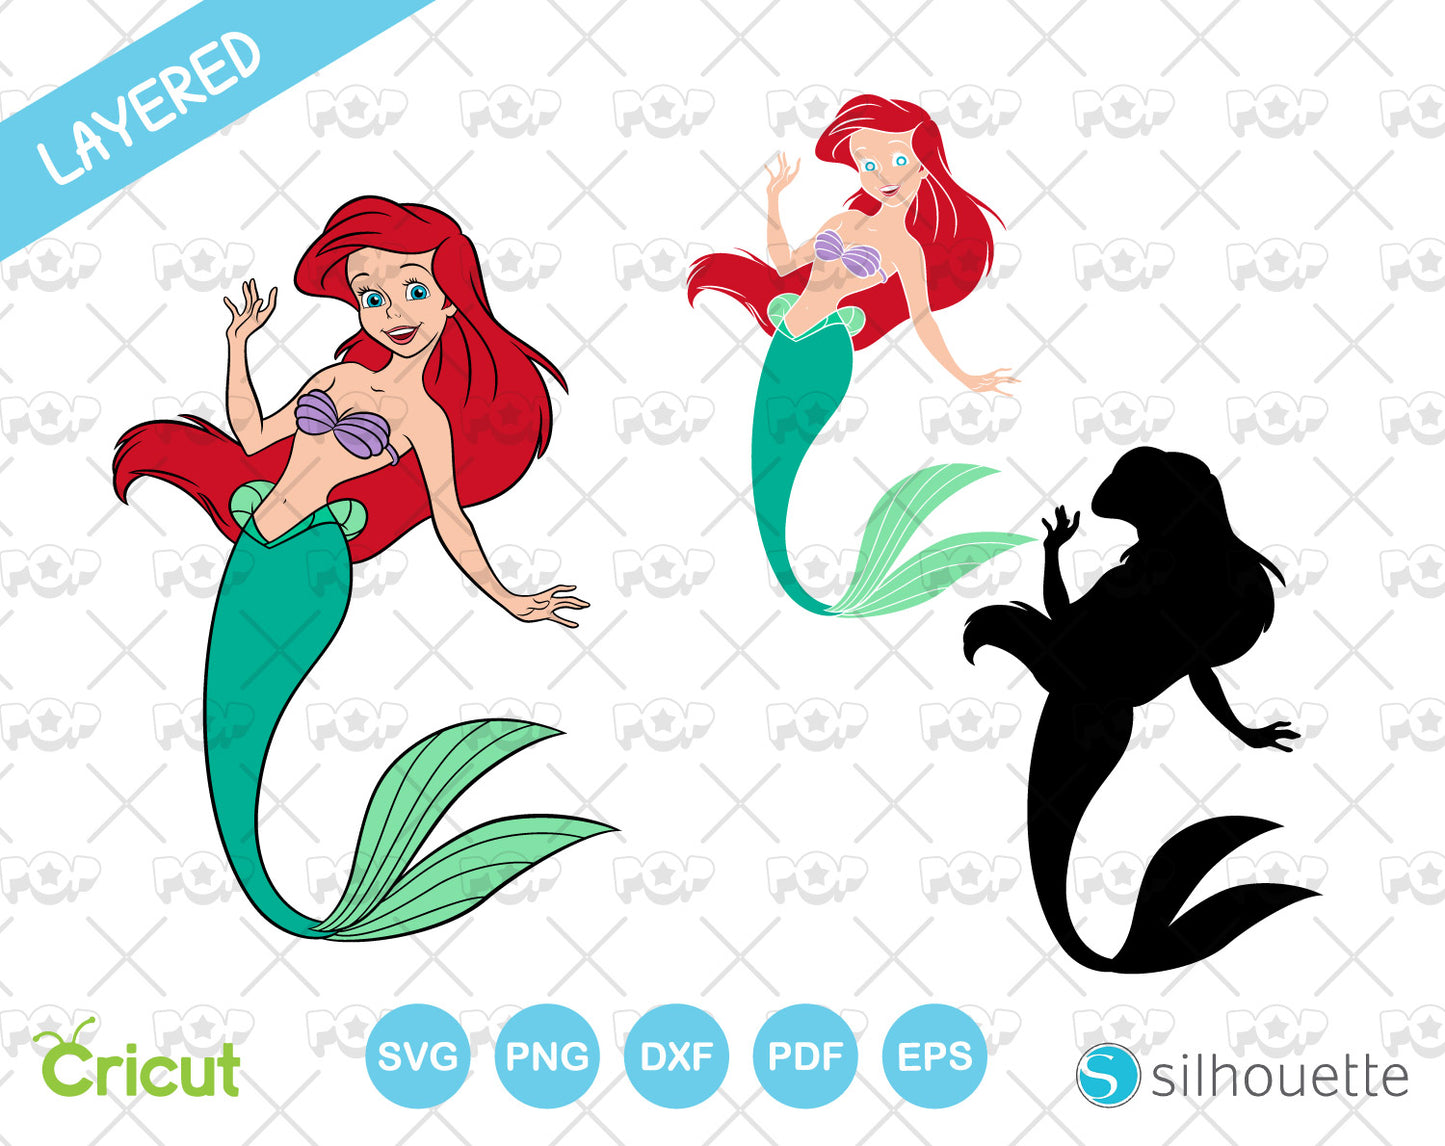 The Little Mermaid clipart bundle, SVG cutting files for cricut silhouette, SVG, PNG, DXF, instant download